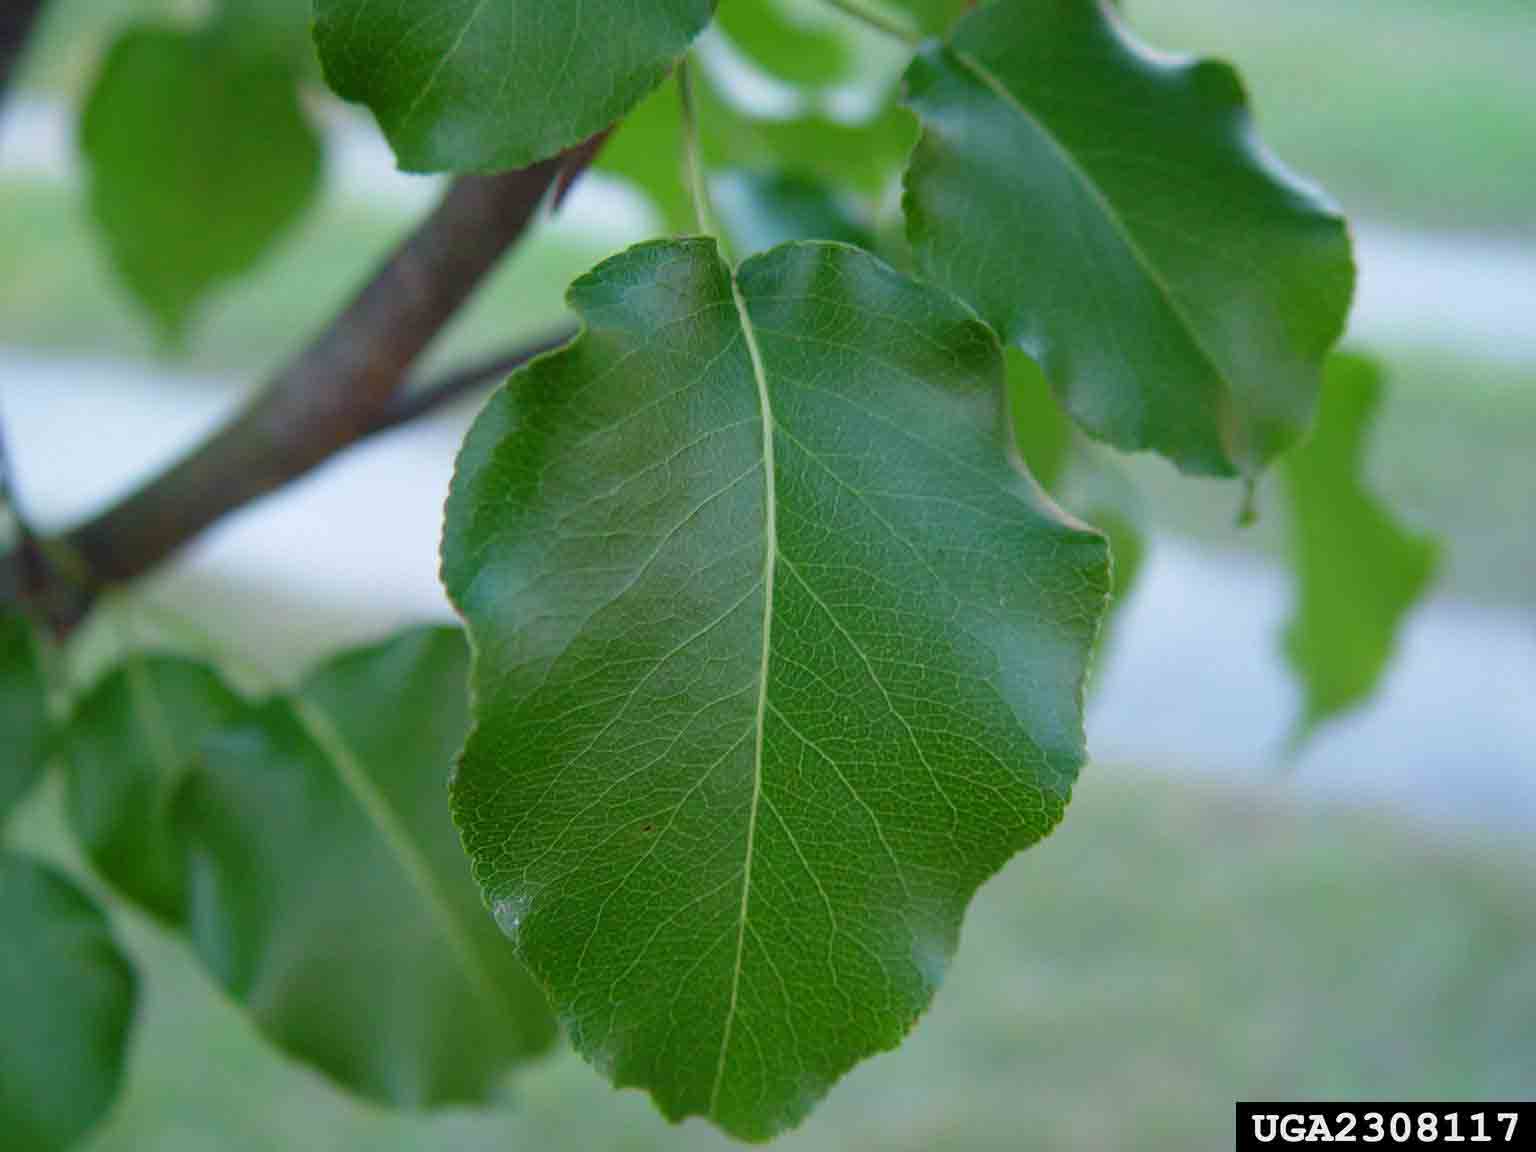 Bradford Callery pear leaf, with toothed margins and shiny green surface